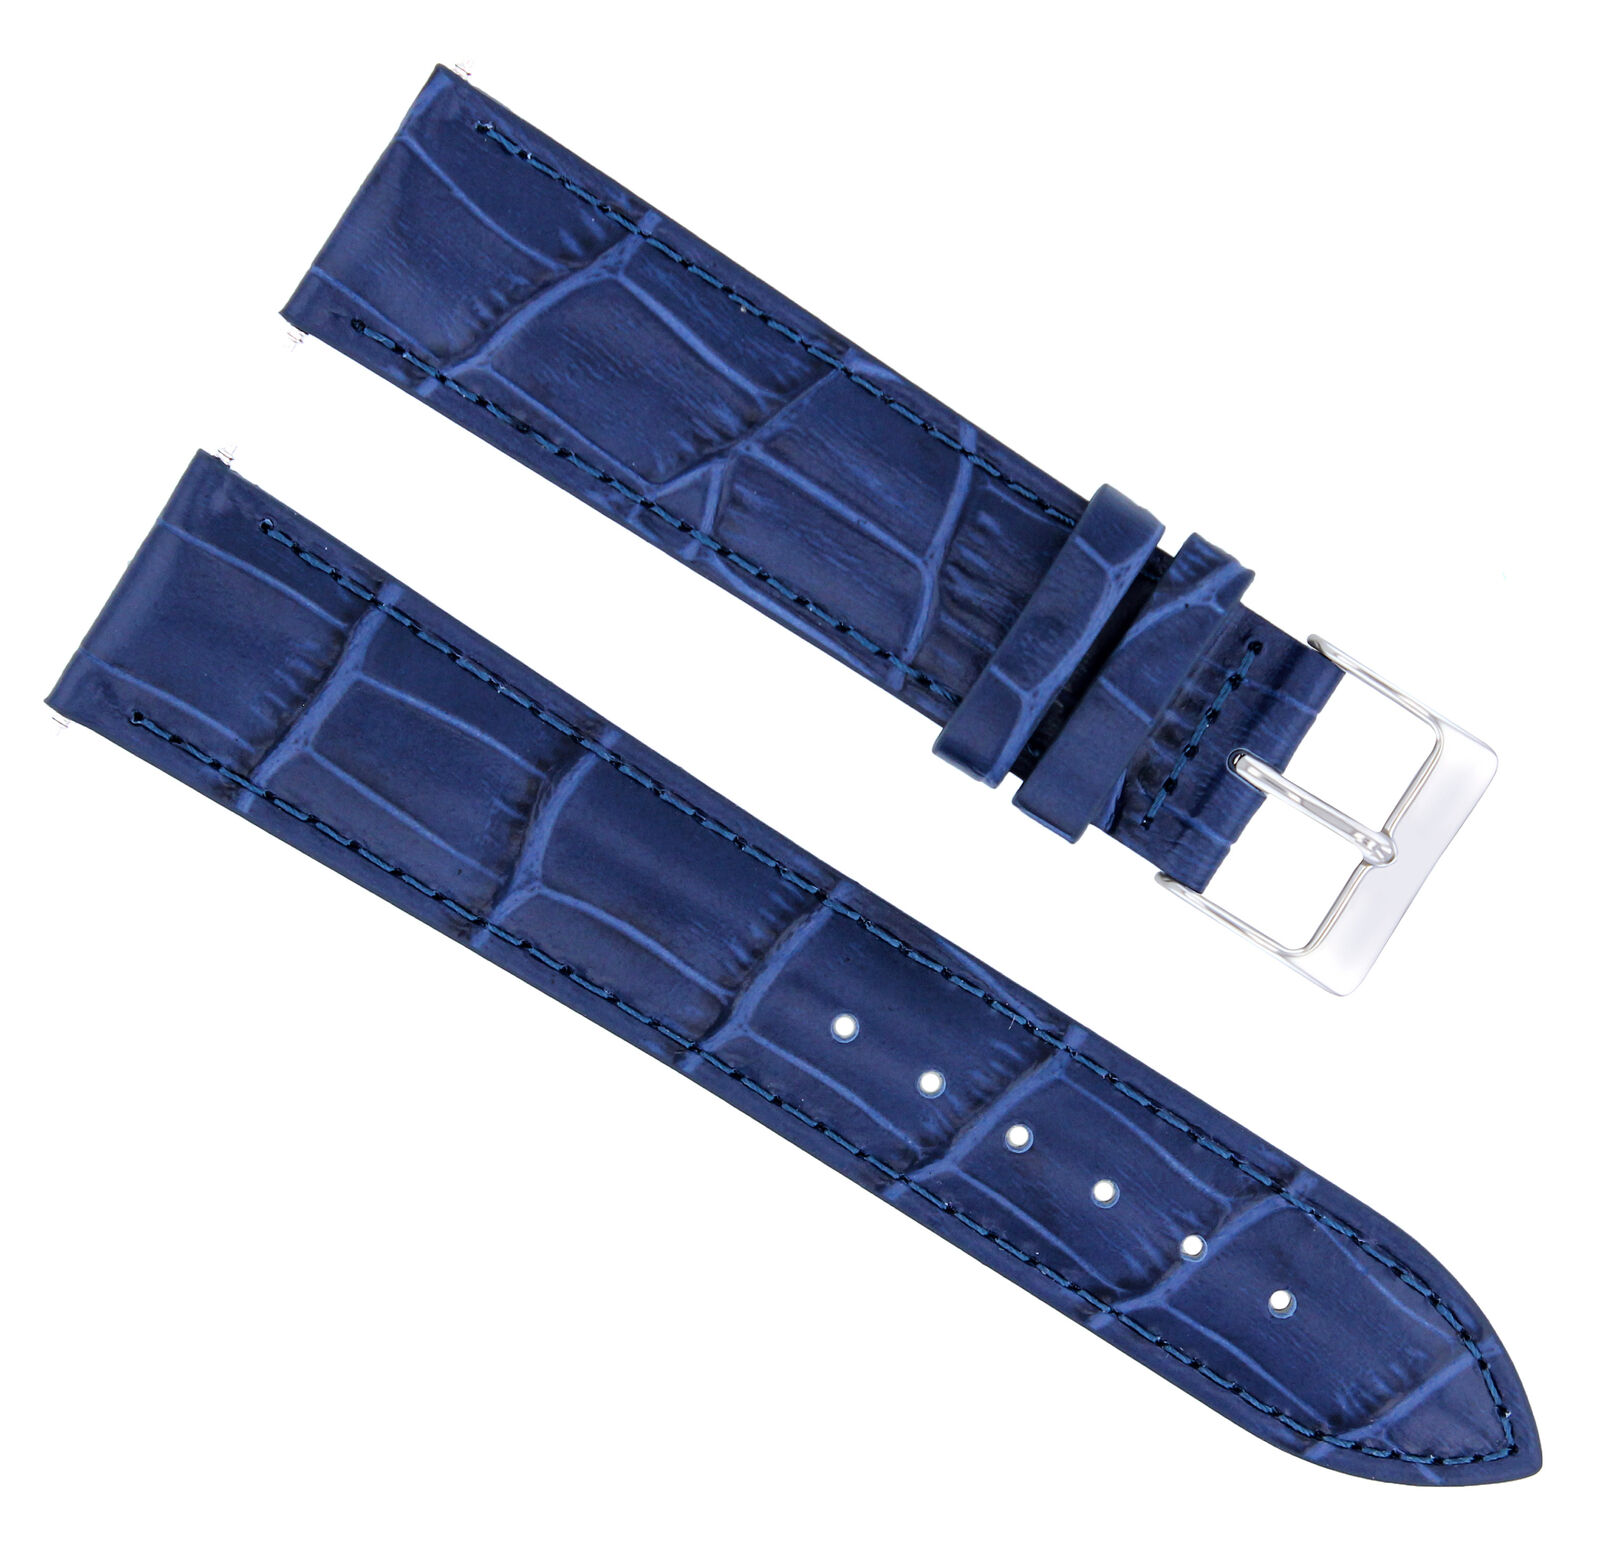 18MM ITALIAN LEATHER WATCH STRAP BAND FOR FRANCK MULLER 5850 WATCH 18/16MM BLUE